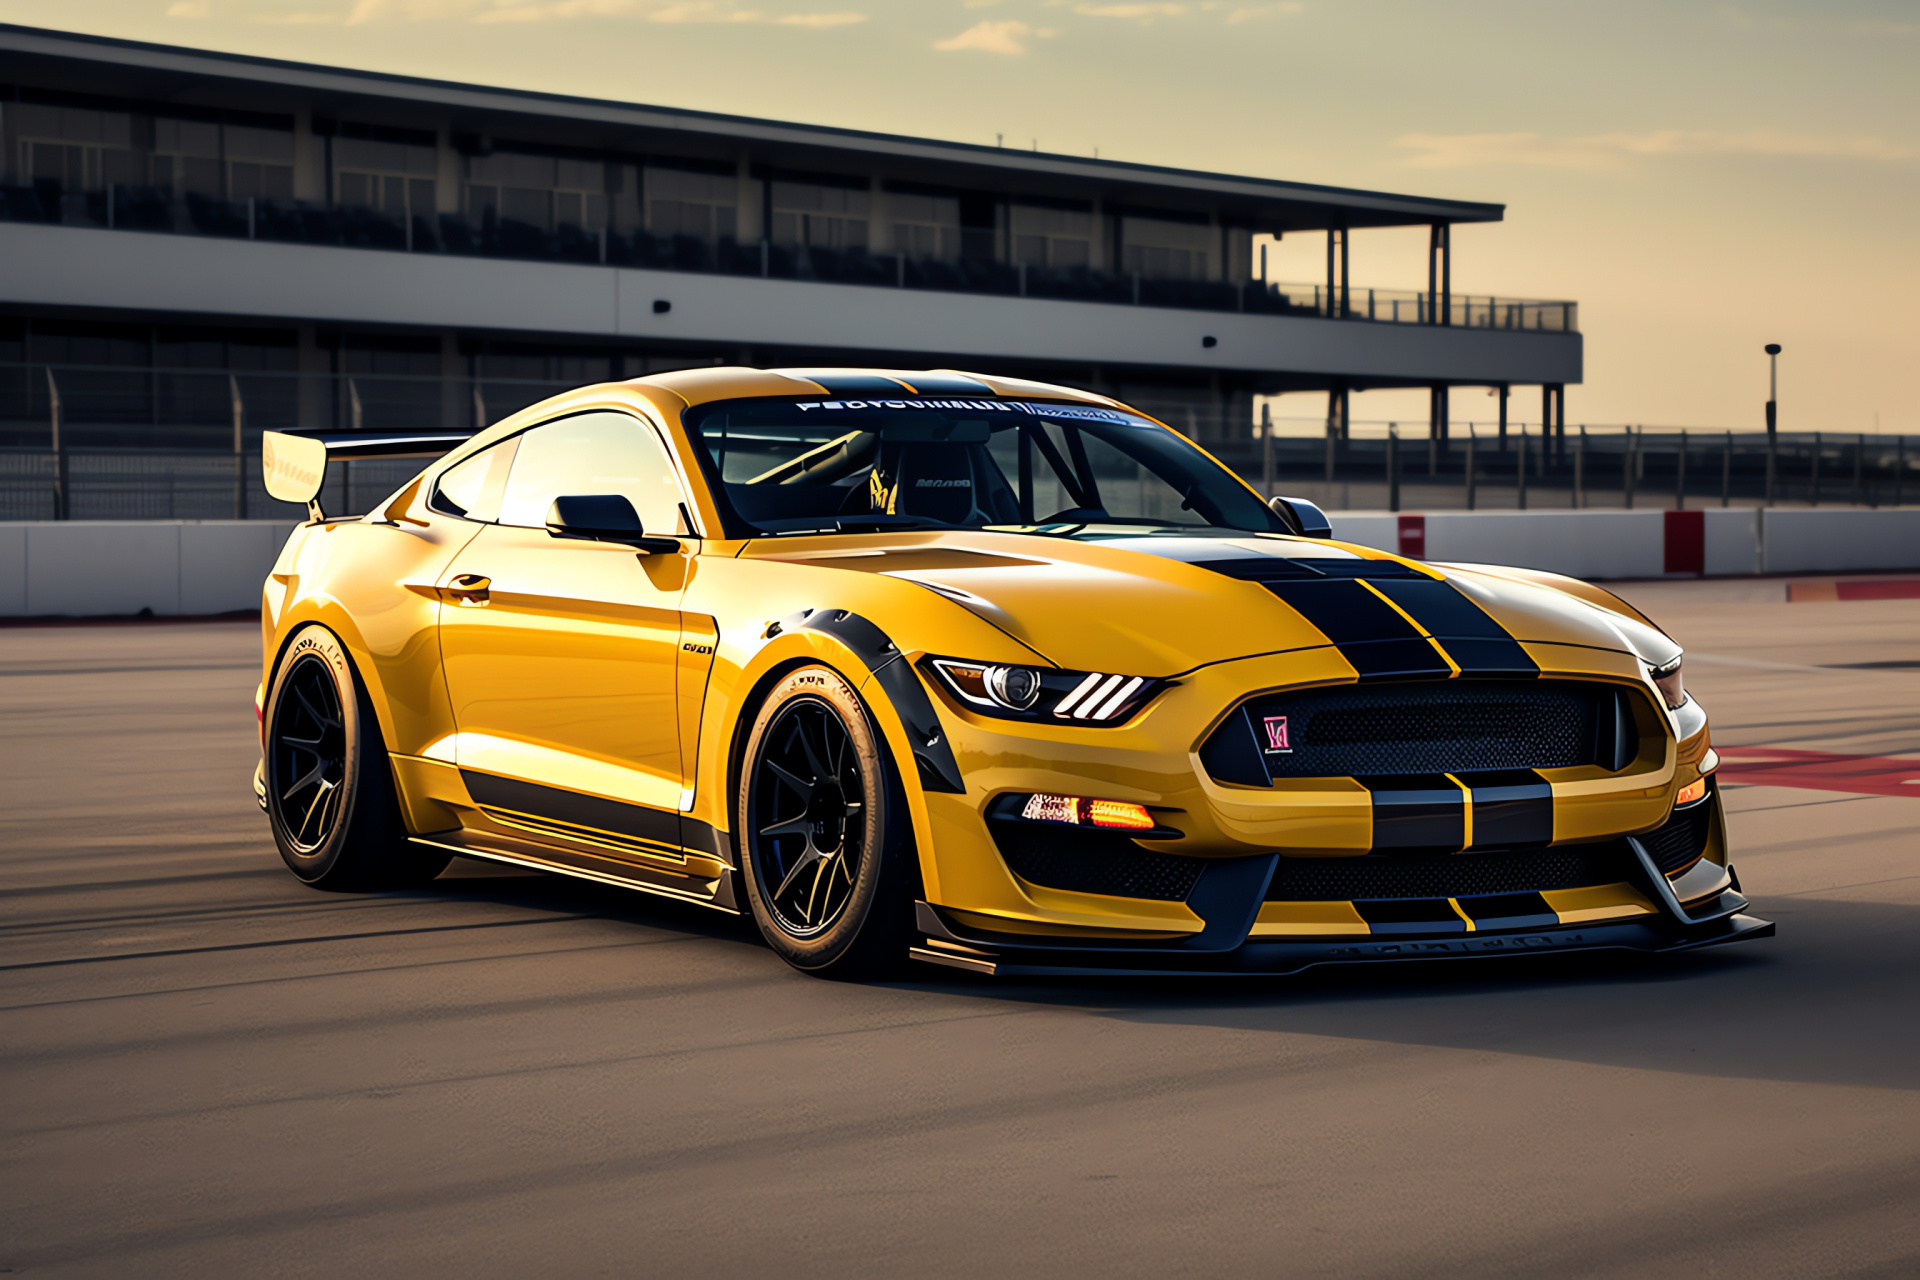 Mustang at Circuit of the Americas, GT350R track-oriented model, Streamlined auto kit, Composite material applications, Robust exhaust system, HD Desktop Image